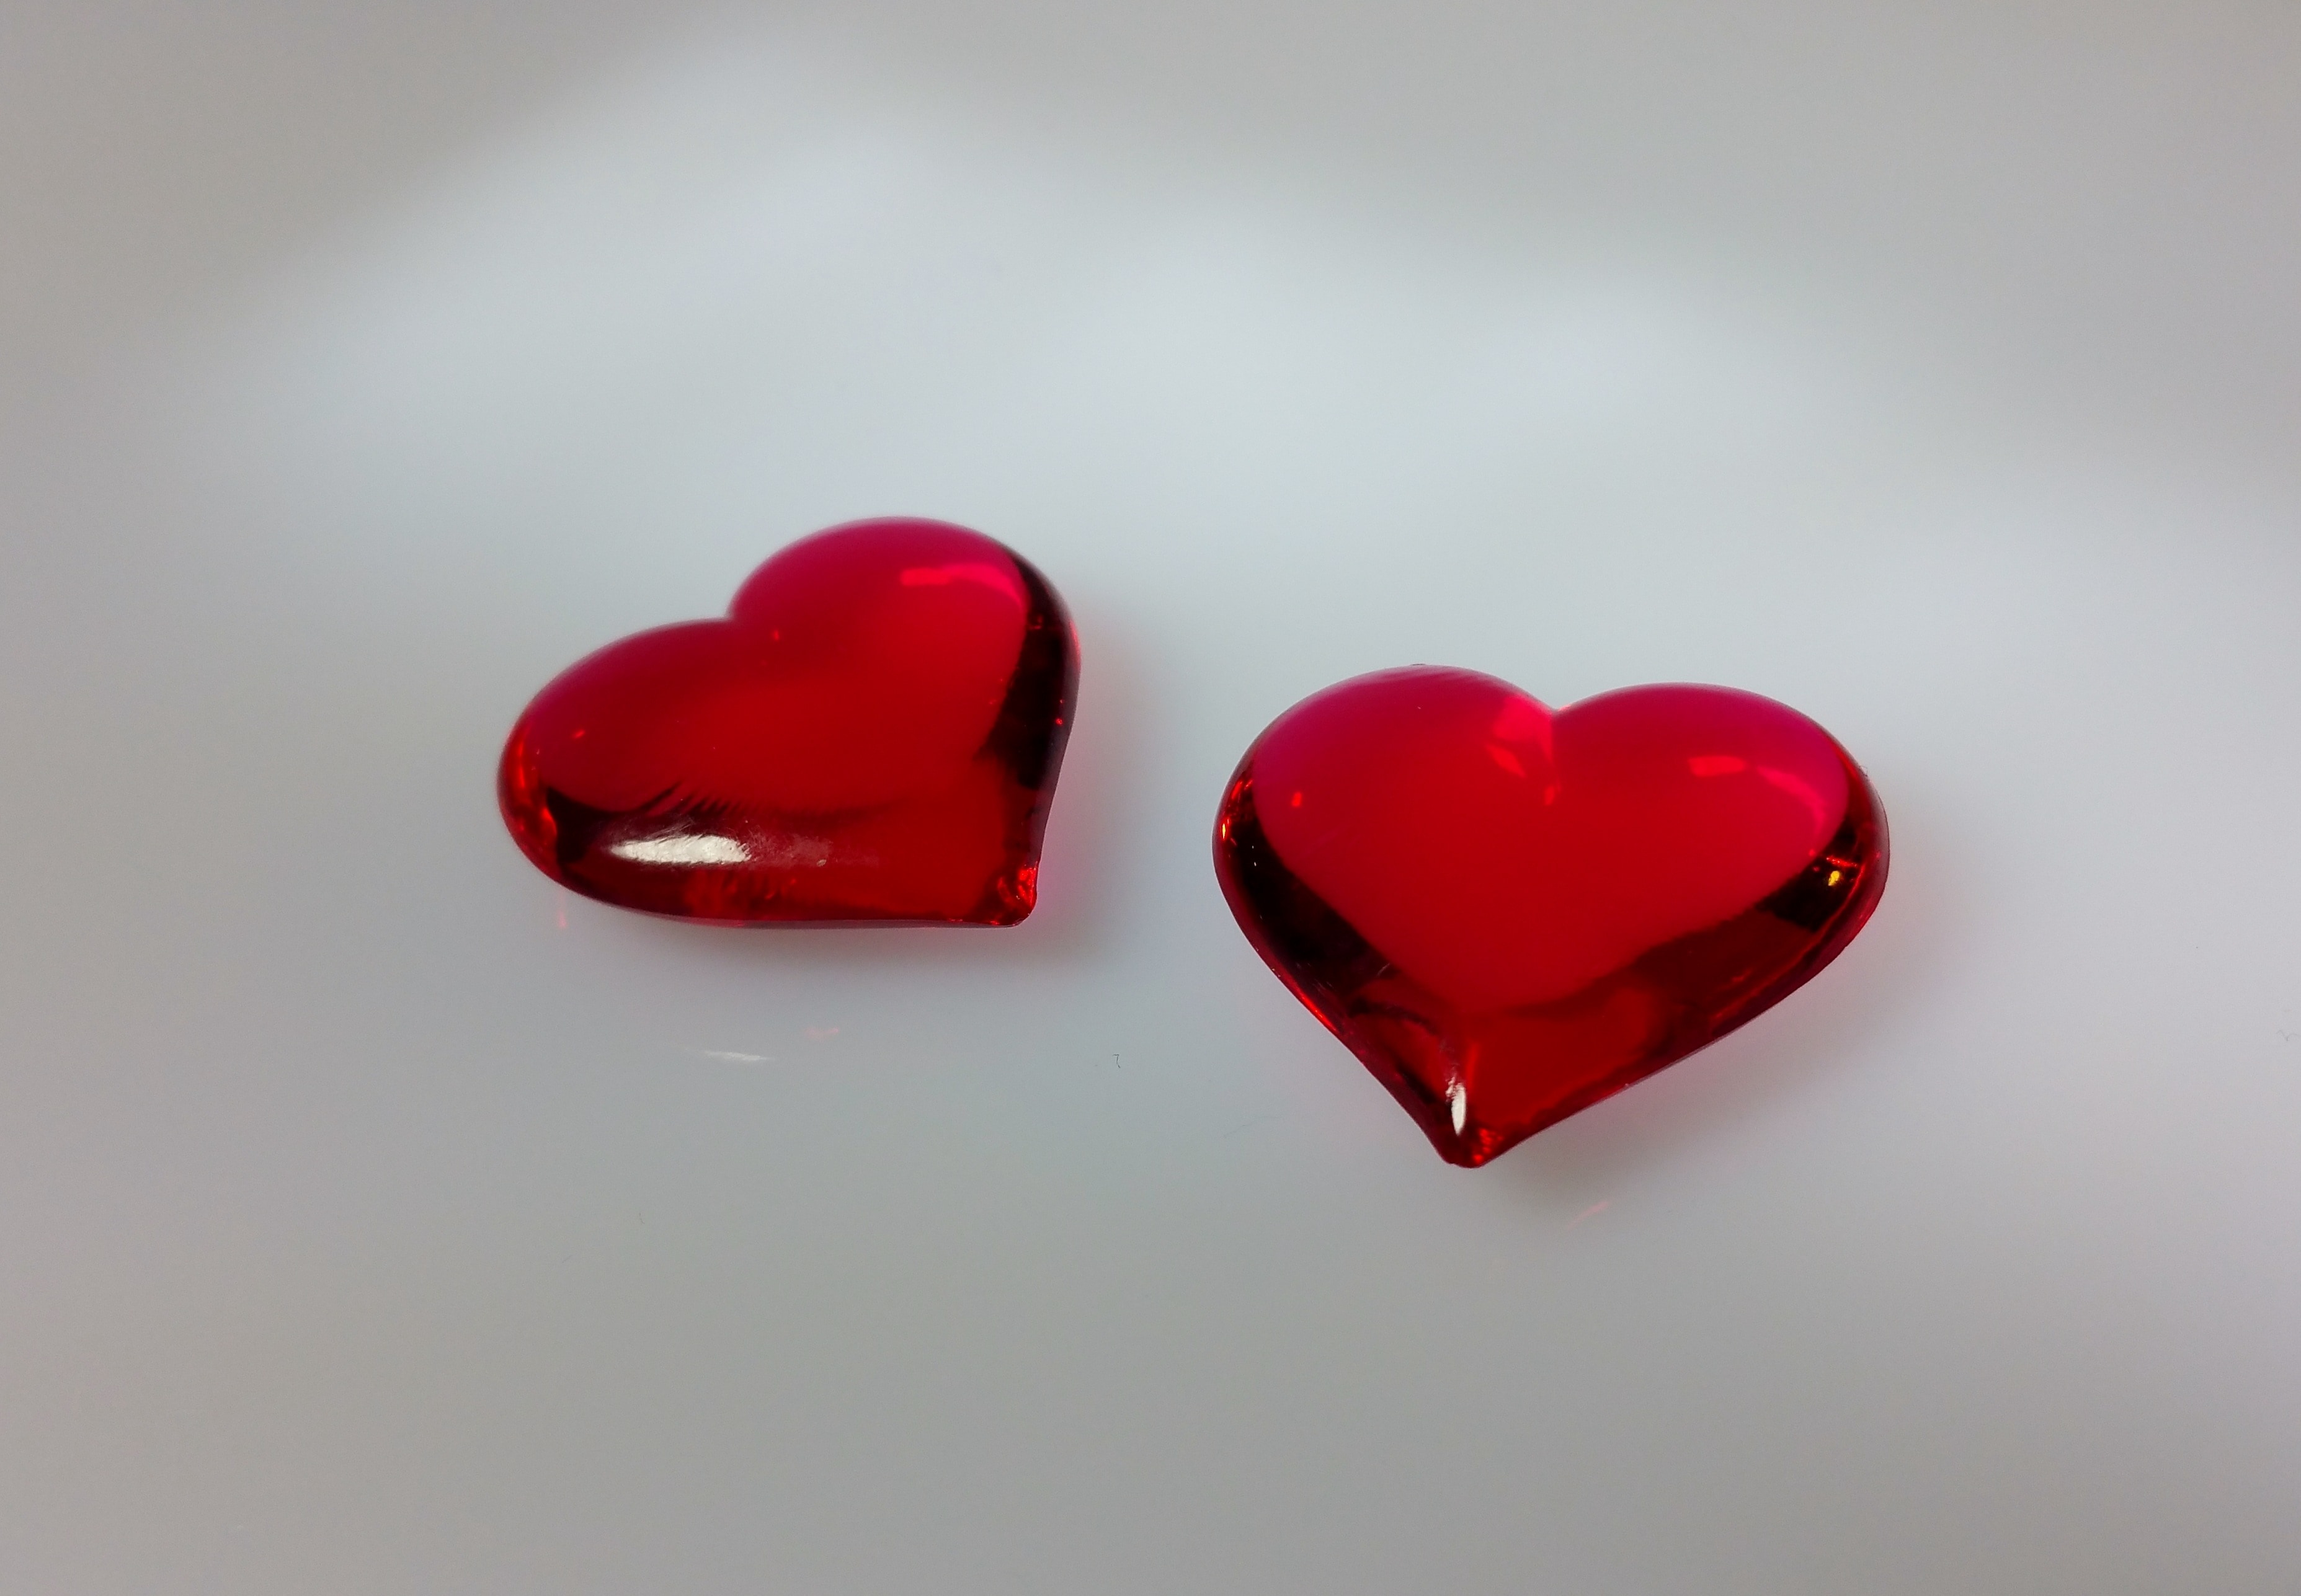 2 red heart shape ornaments